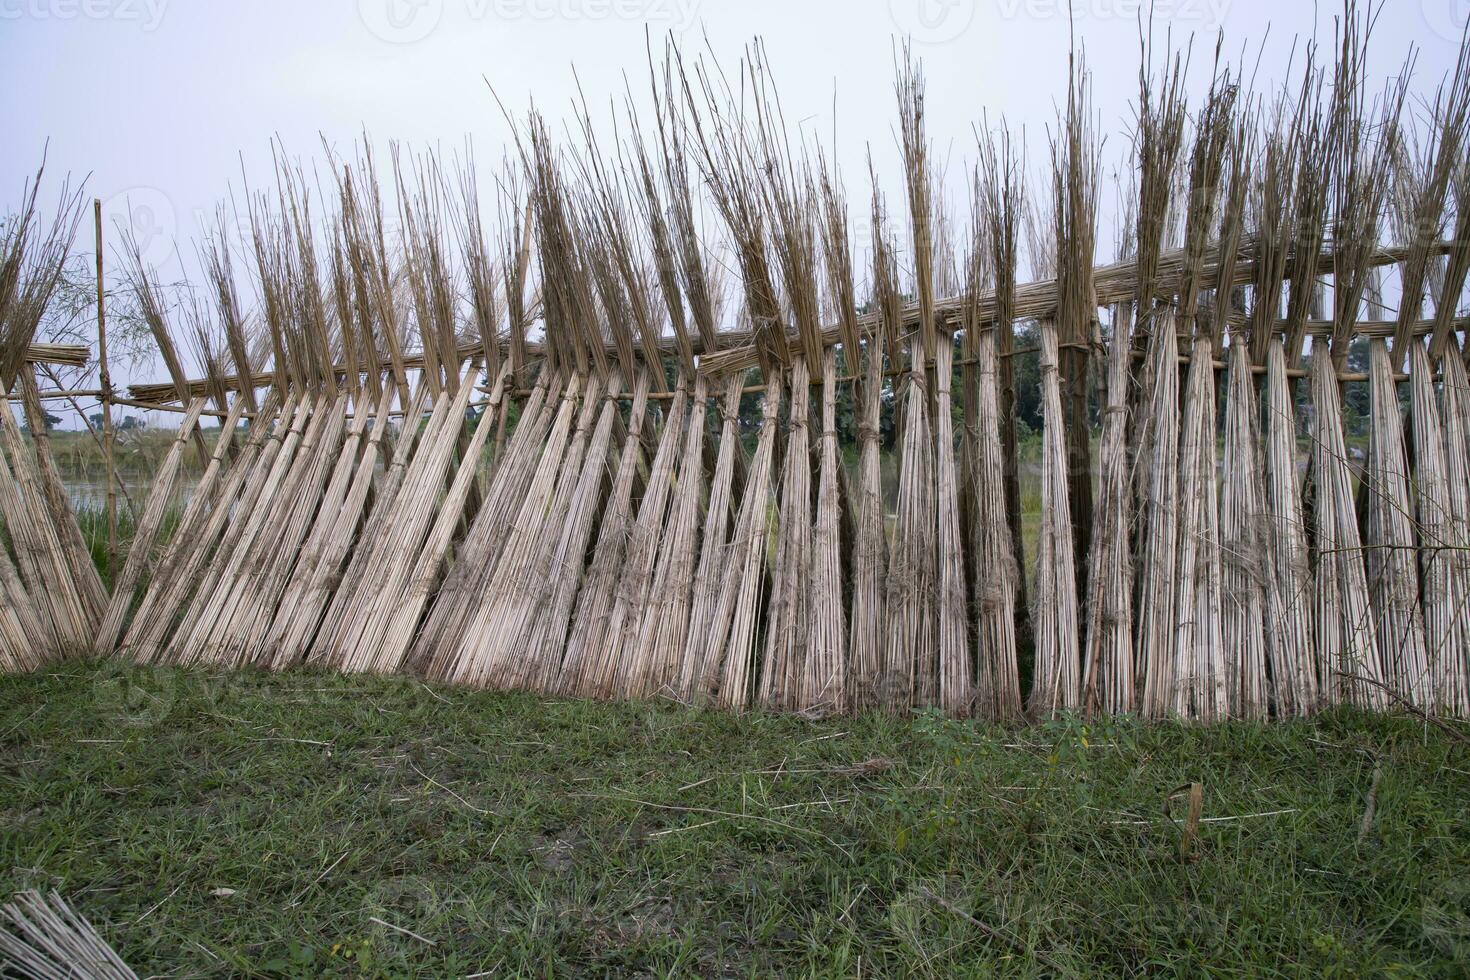 Many Jute sticks are stacked for sun drying at Sadarpur, Faridpur, Bangladesh. One and only Jute cultivation is in Faridpur, Bangladesh photo